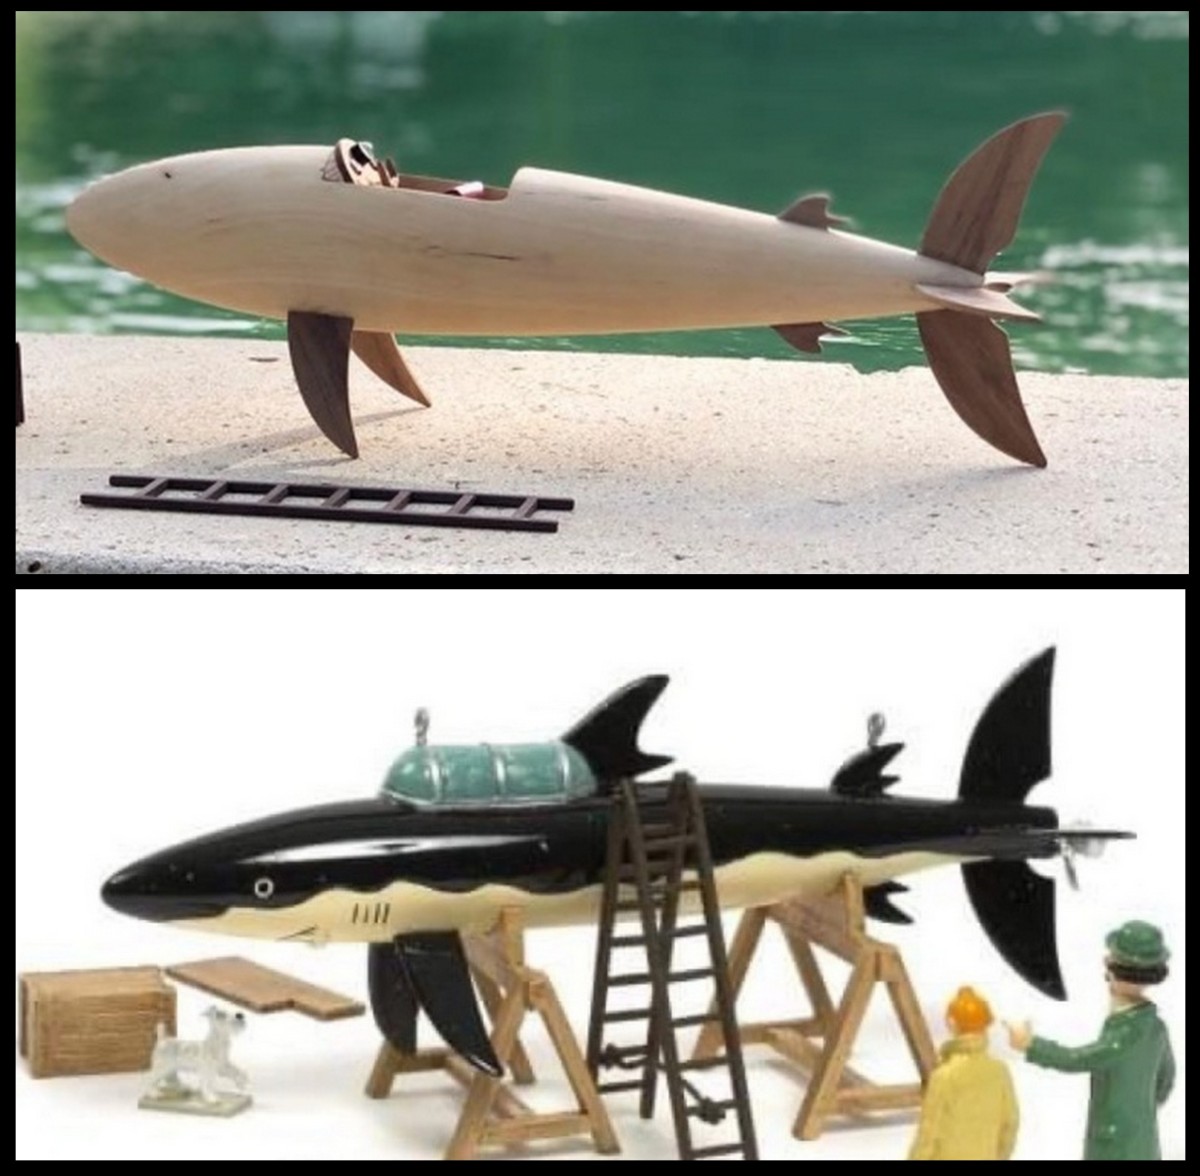 Sous-marin Requin - BD Tintin [scratch bois 1/10°] de paulthery1999 Smx210